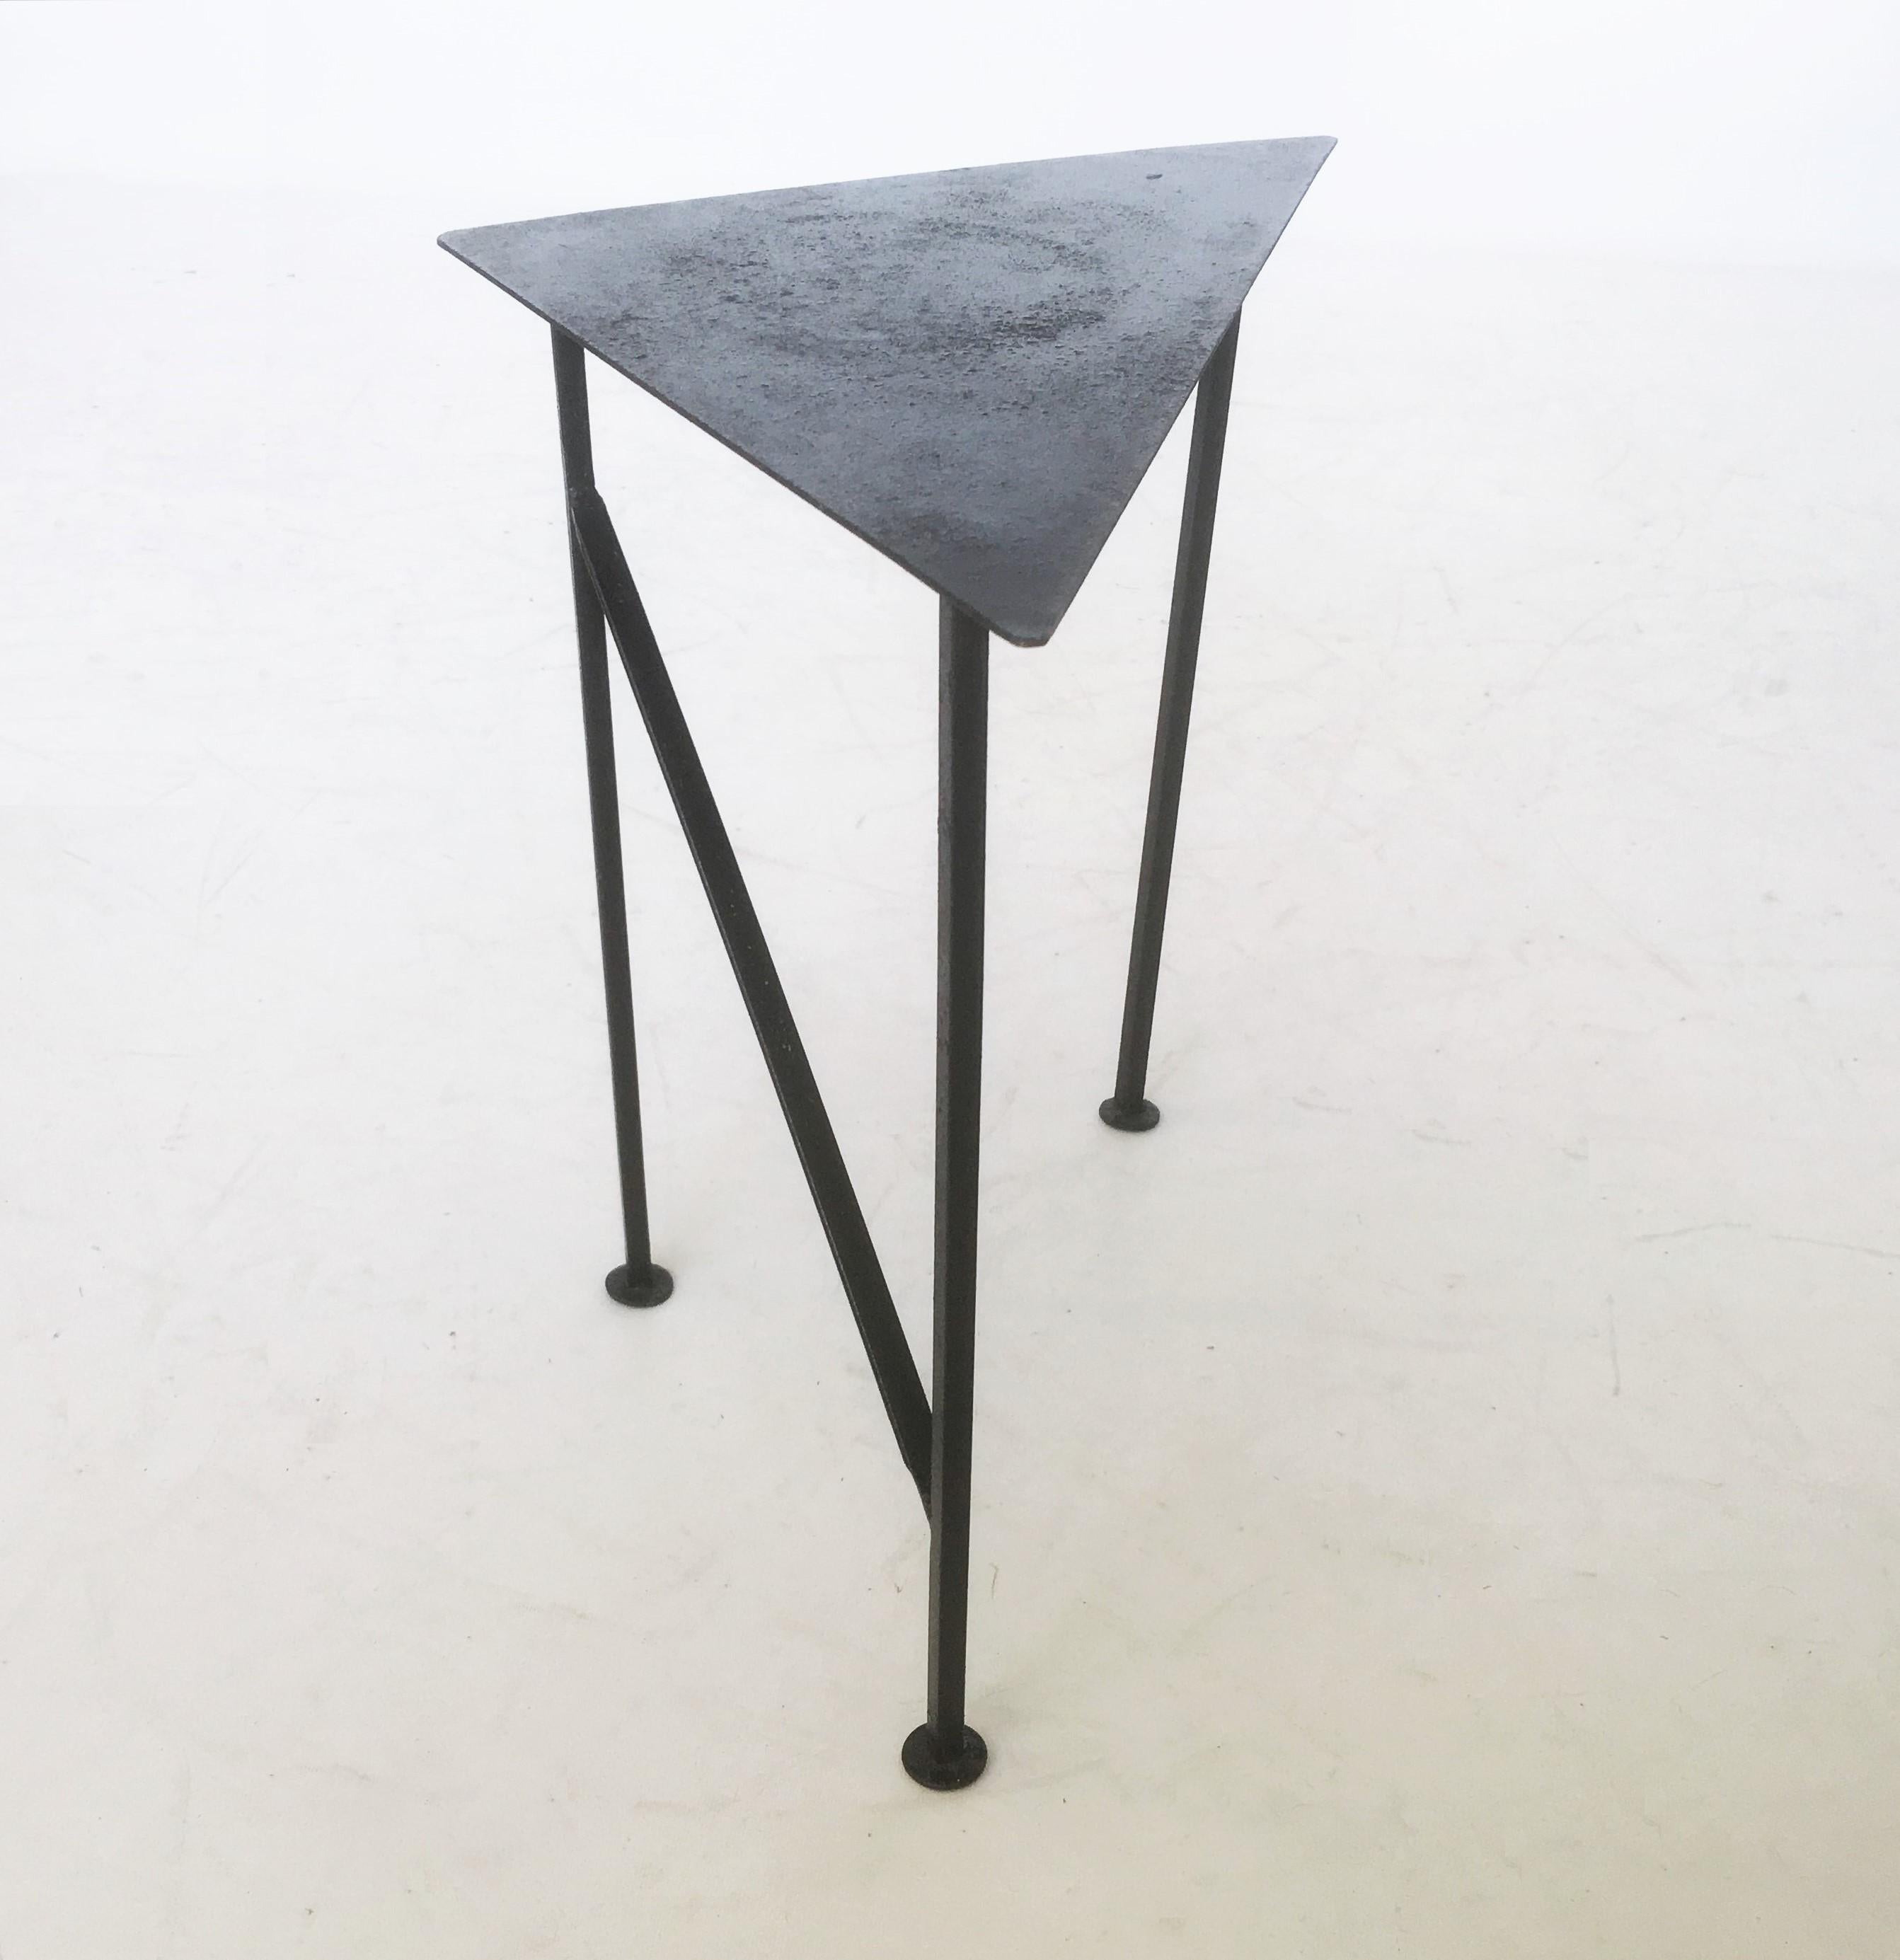 Unique Triangular Handcrafted Blackened Iron Drink Tables, Set of Two 1